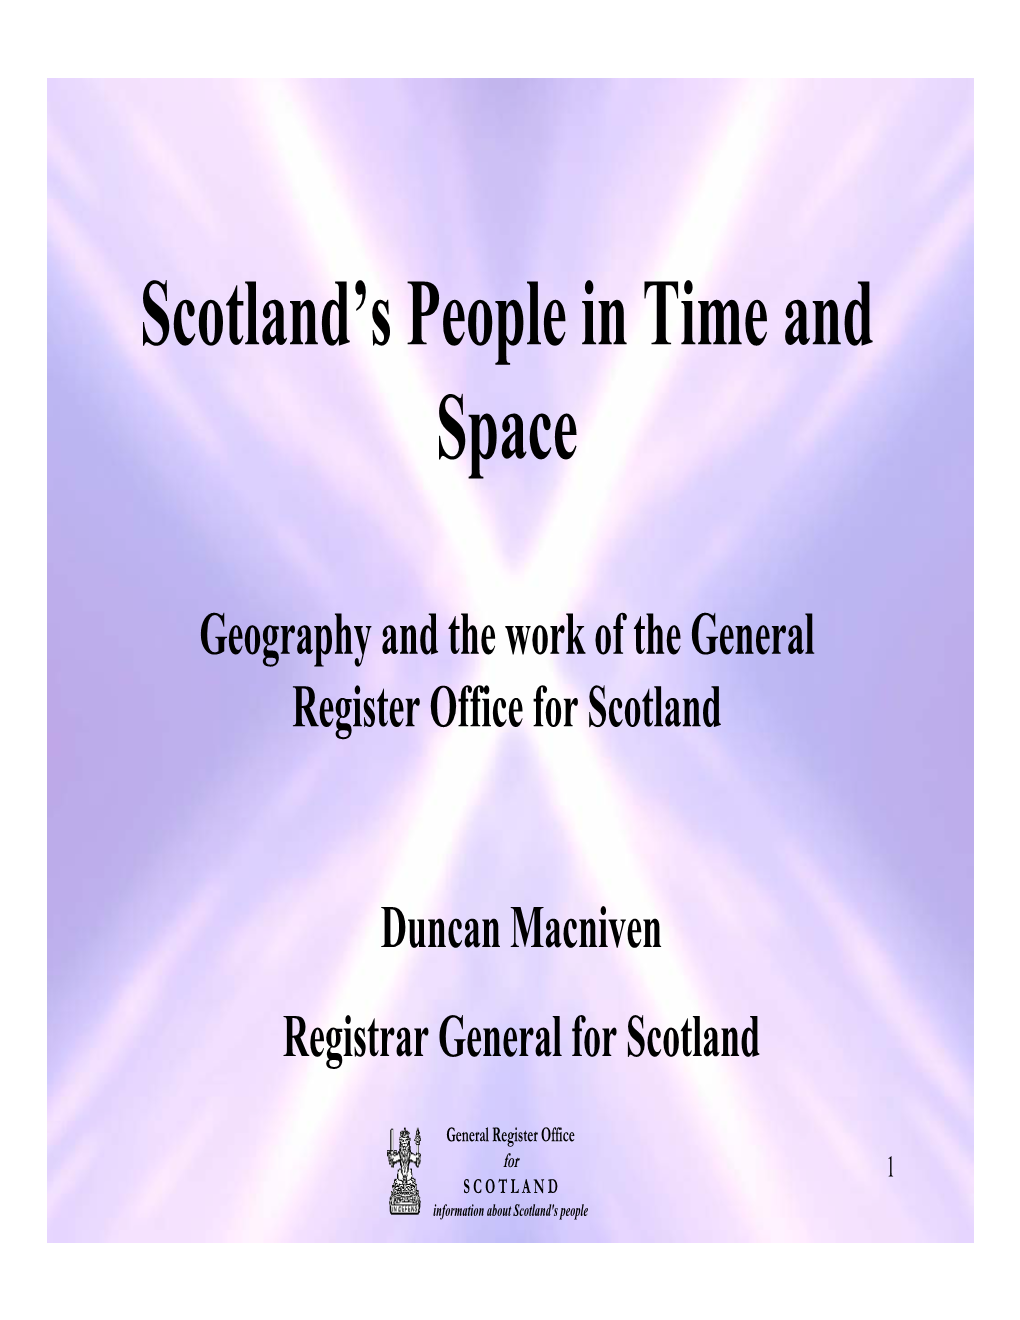 Scotland's People in Time and Space